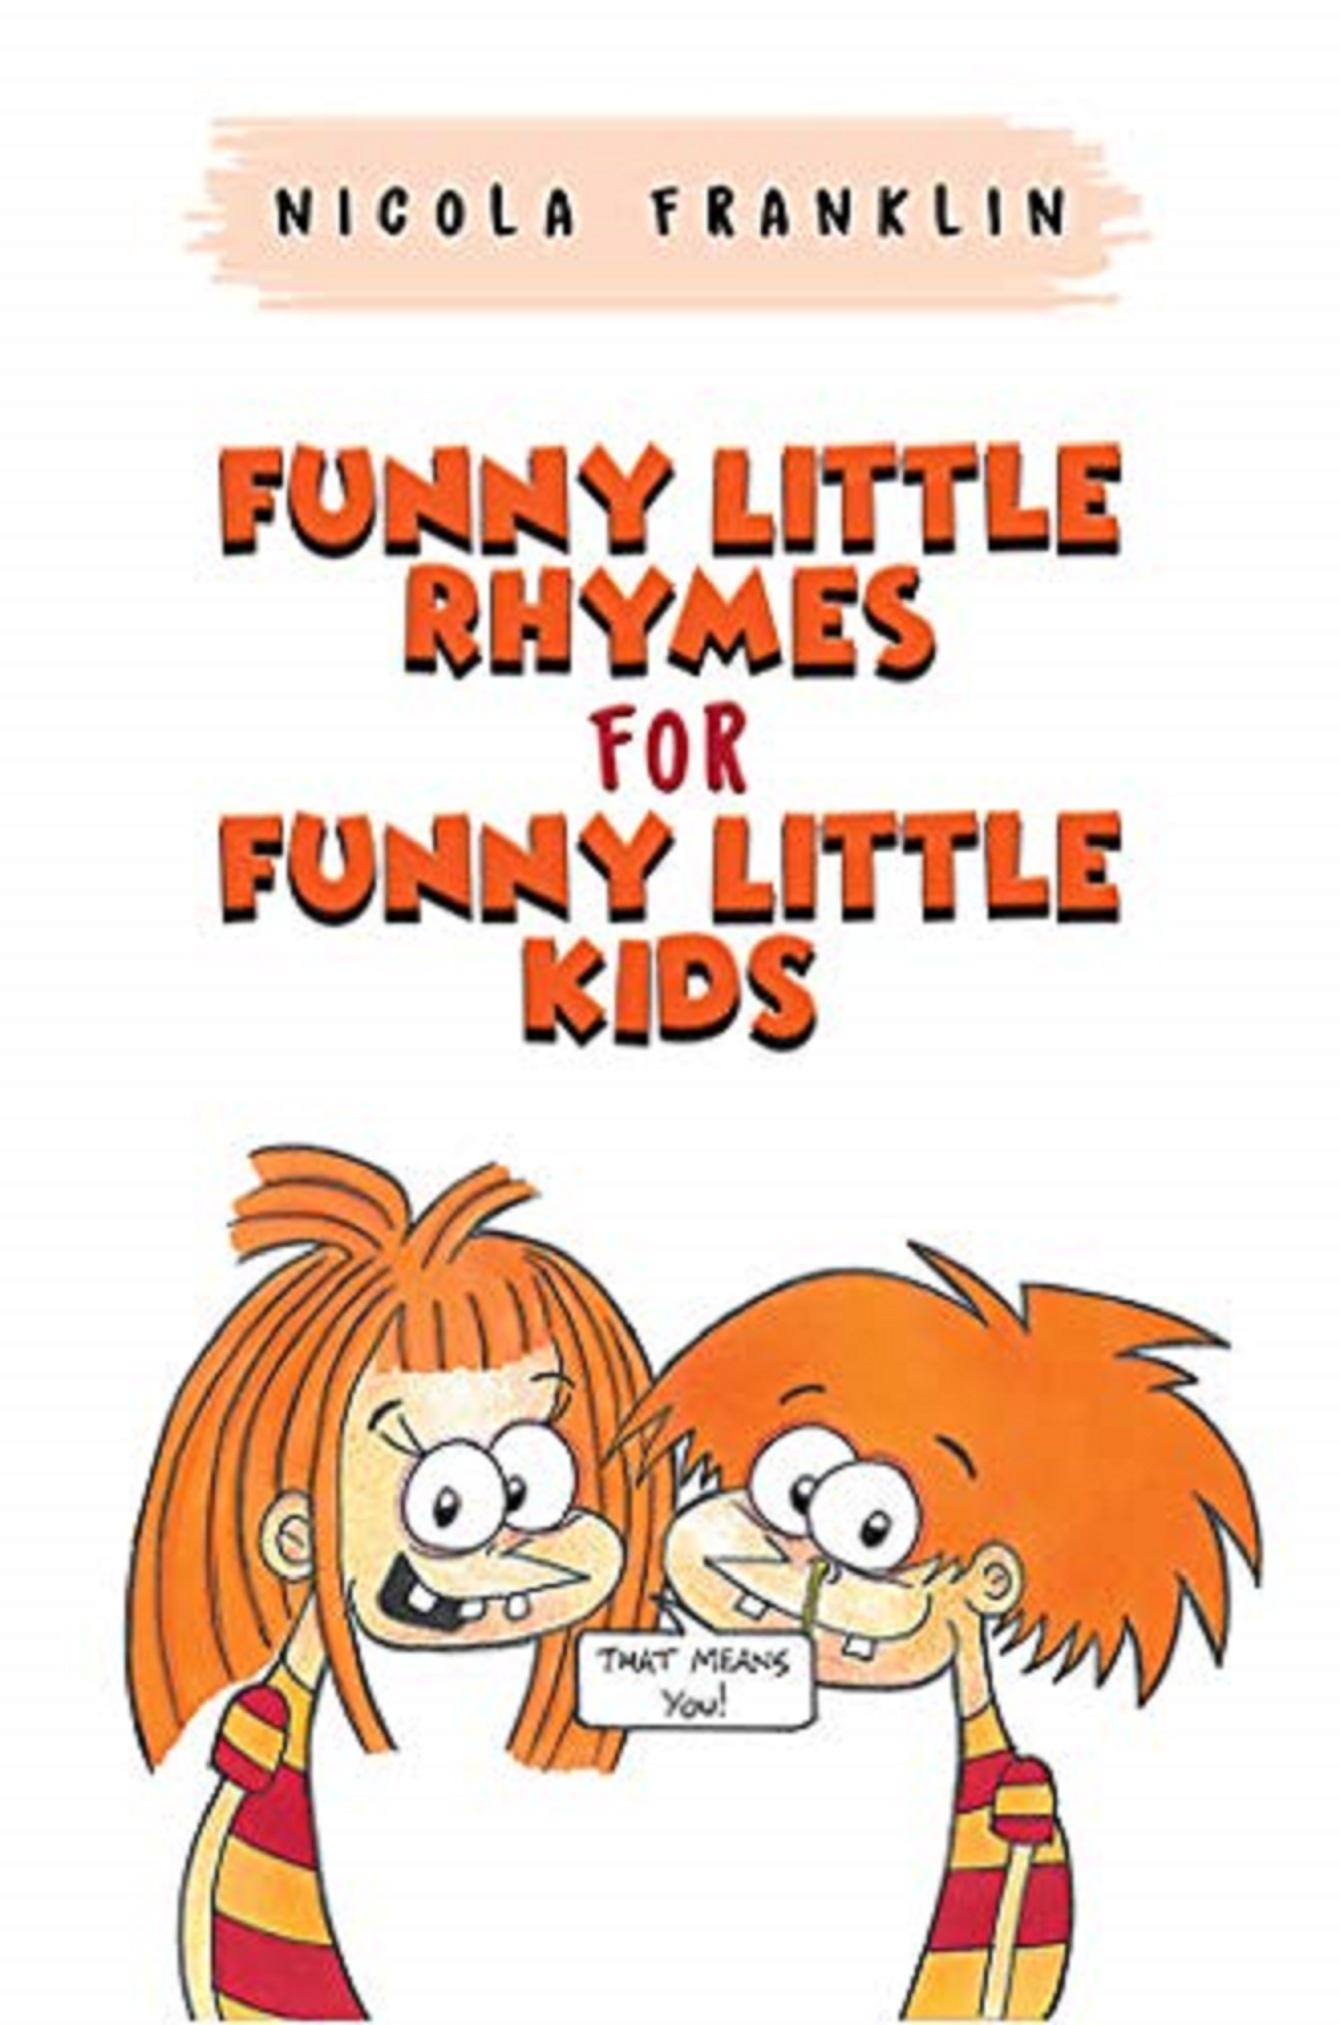 Funny Little Rhymes for Funny Little Kids